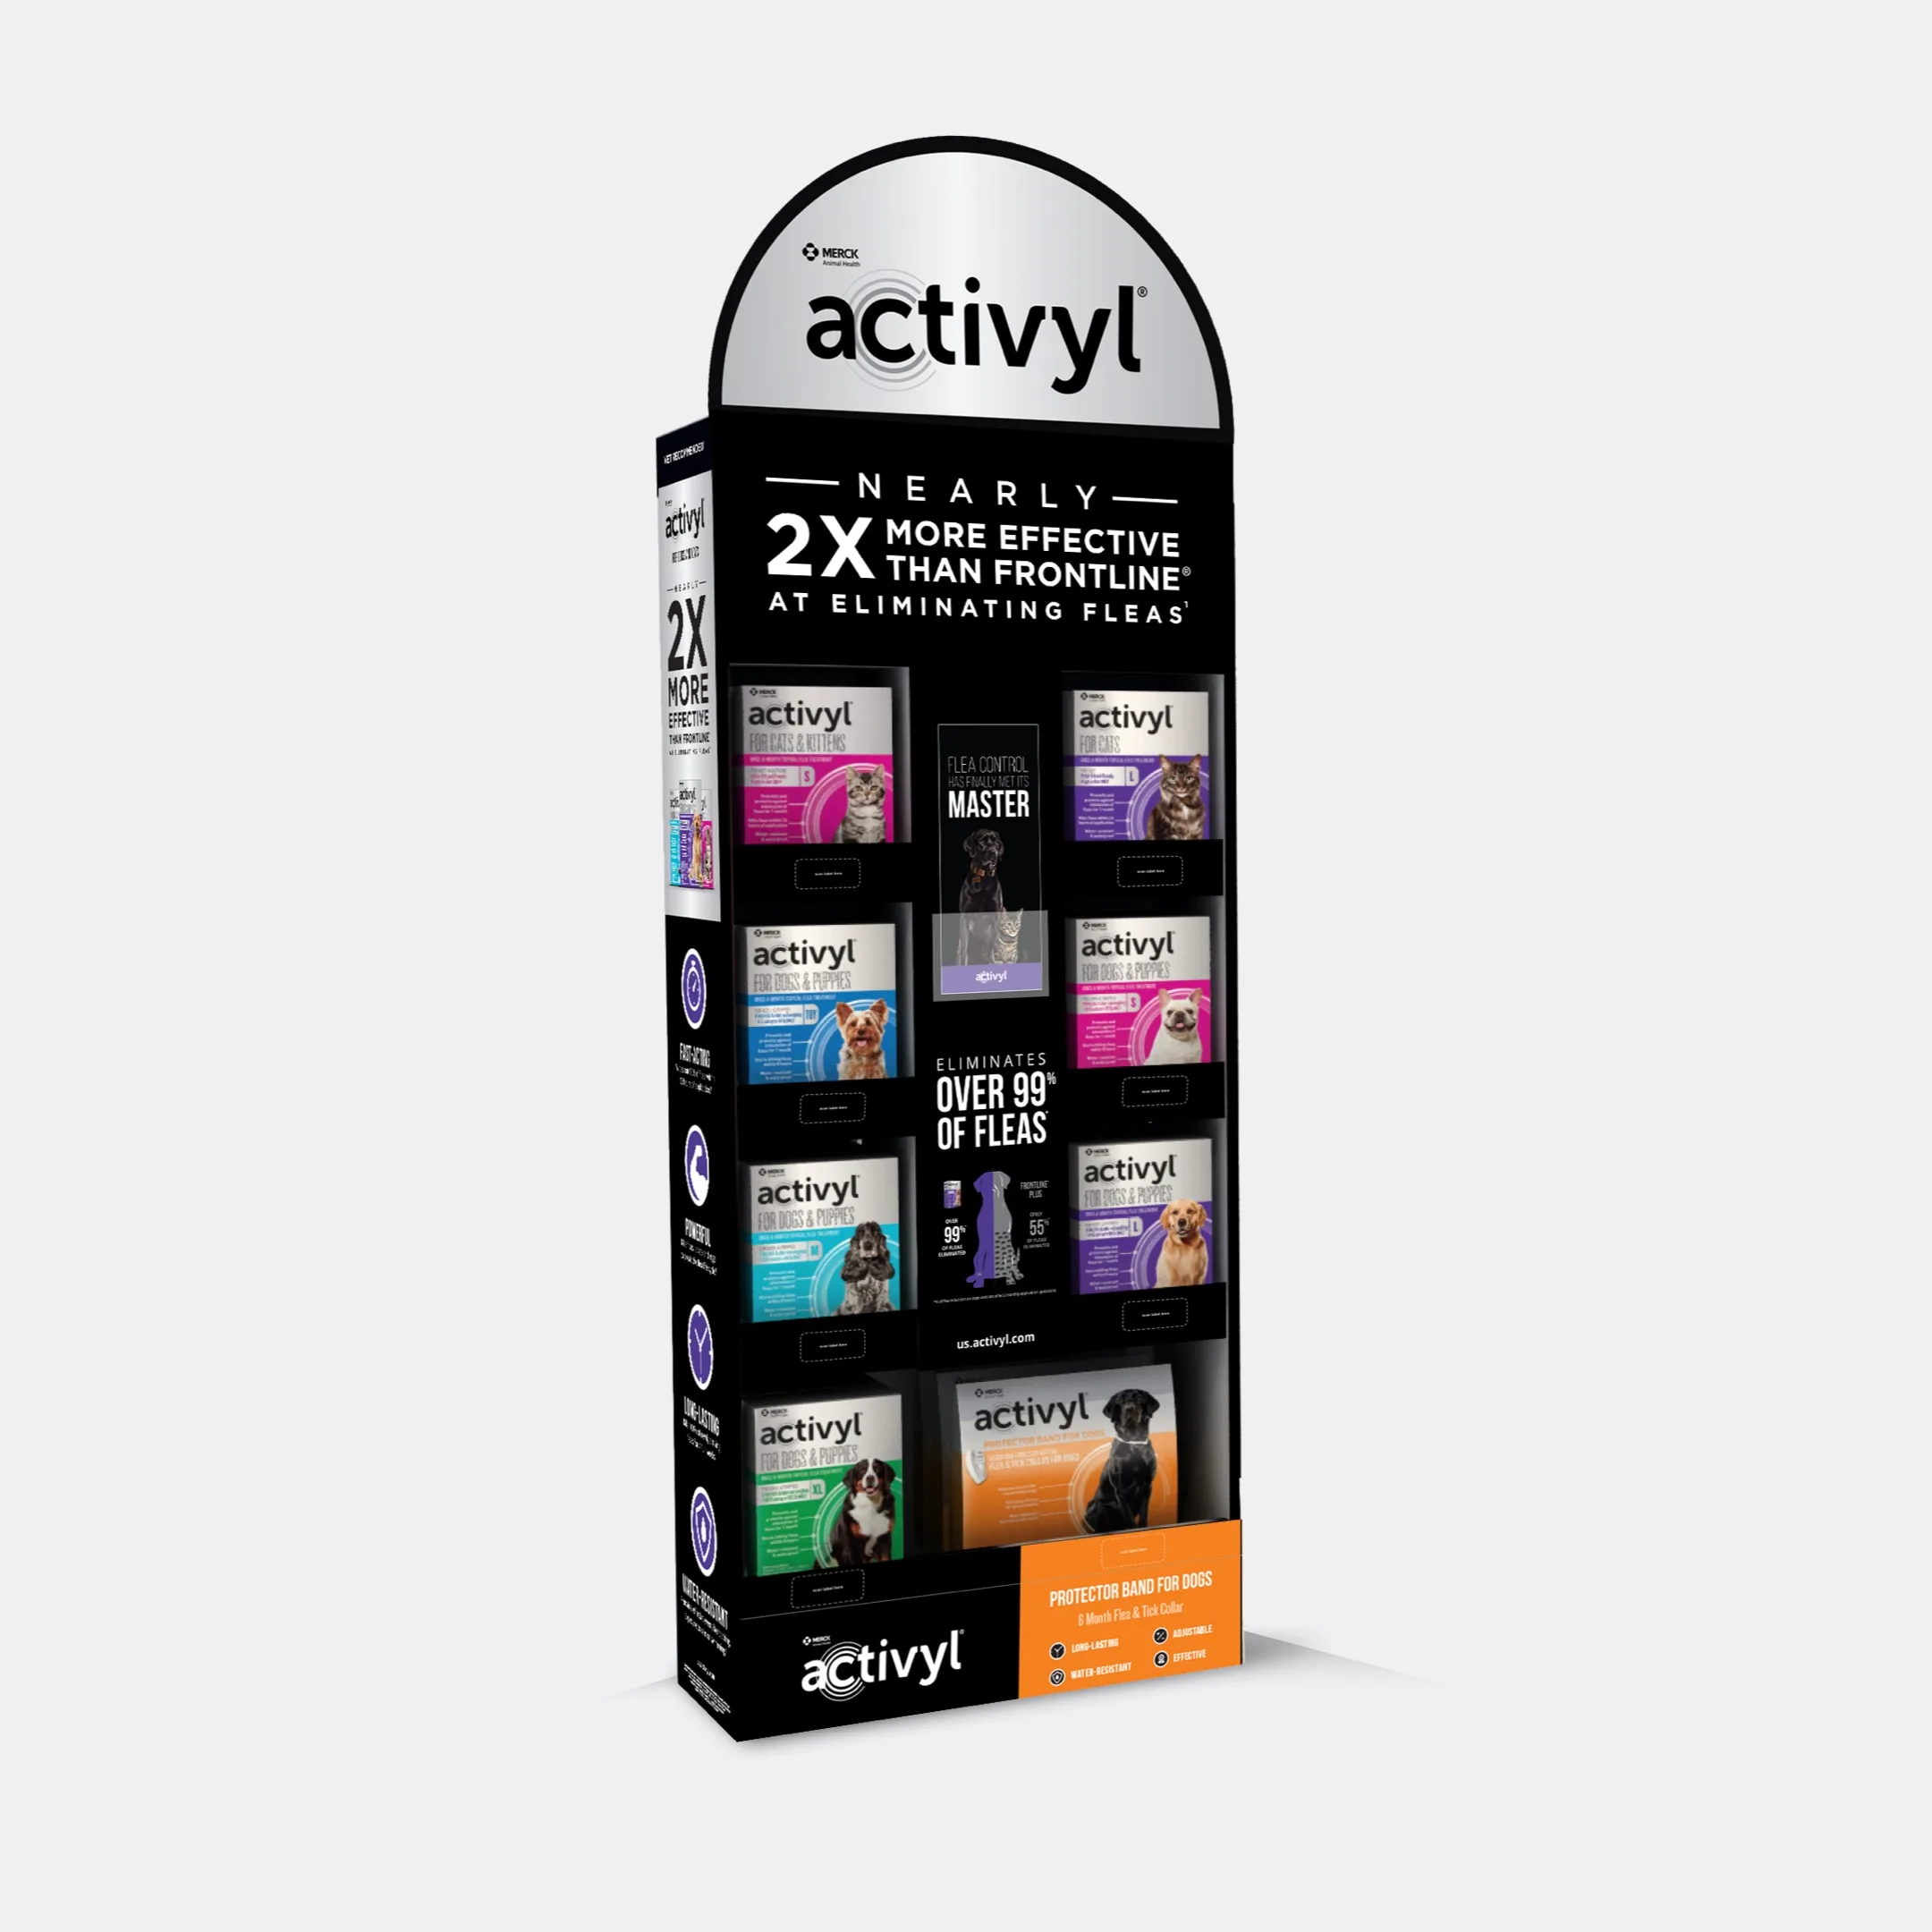 Activyl graphic design, marketing and advertising